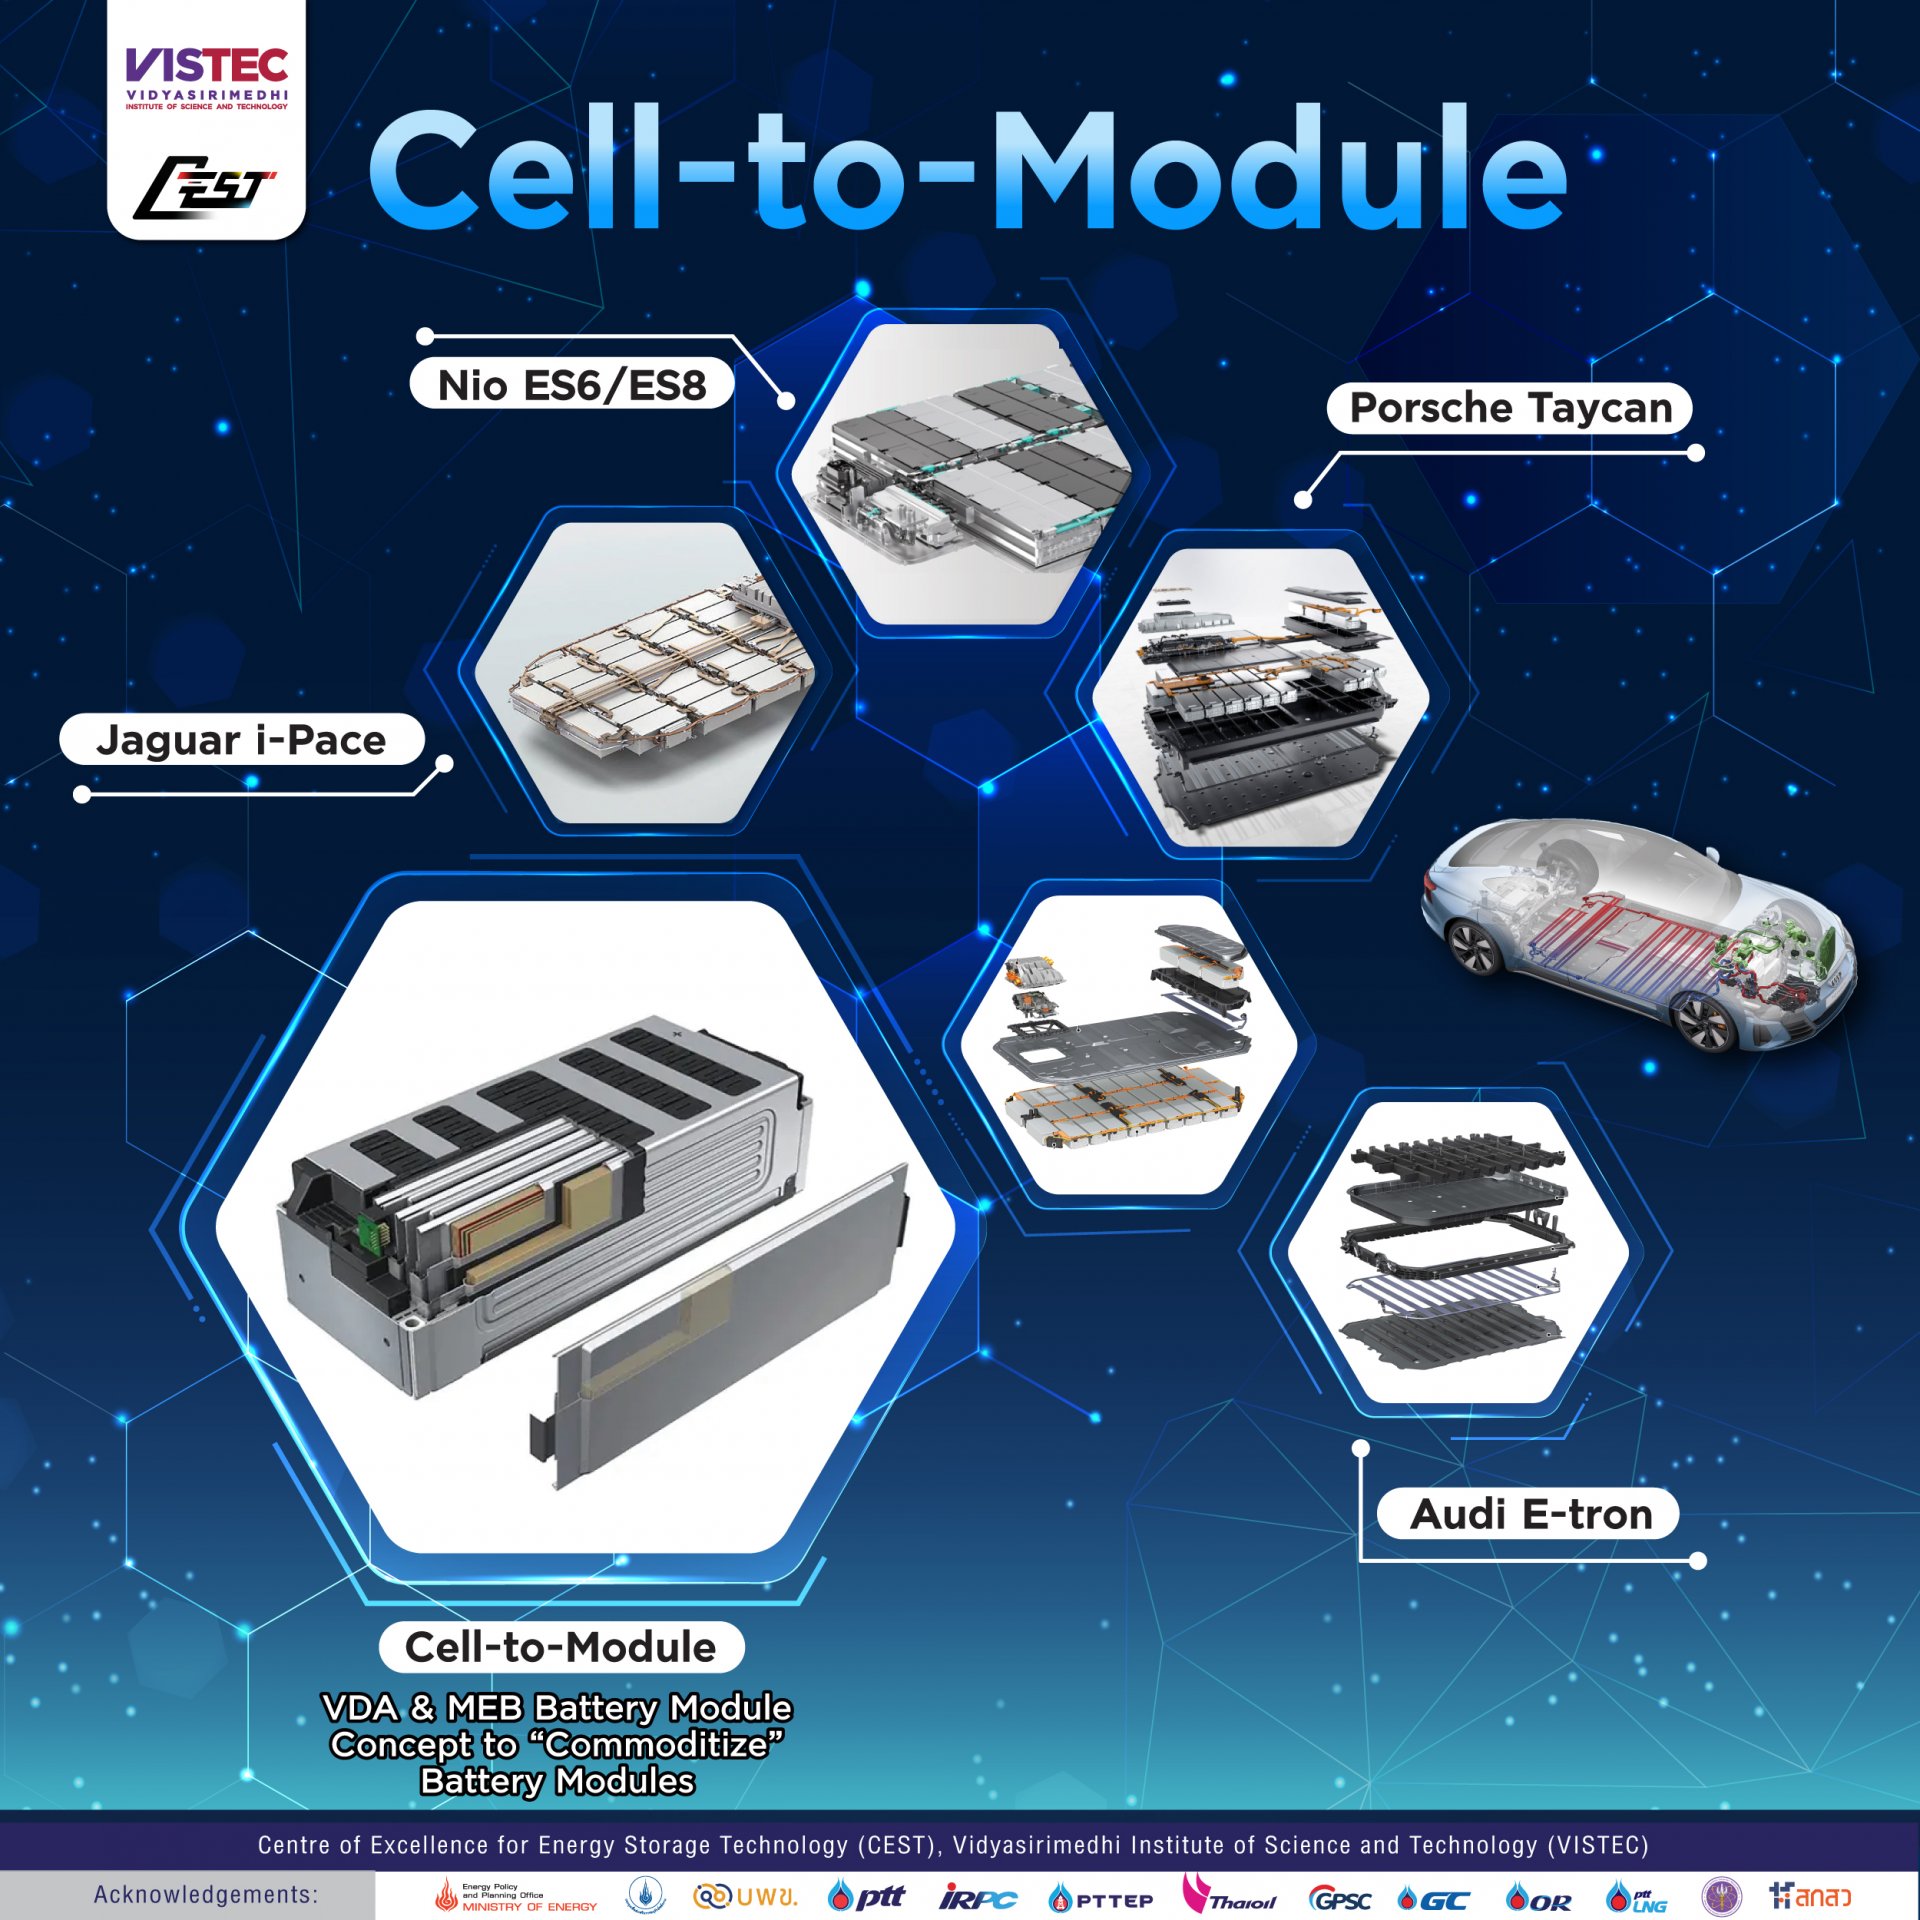 Cell-to-Module VDA & MEB Battery Module Concept to “Commoditize” Battery Modules